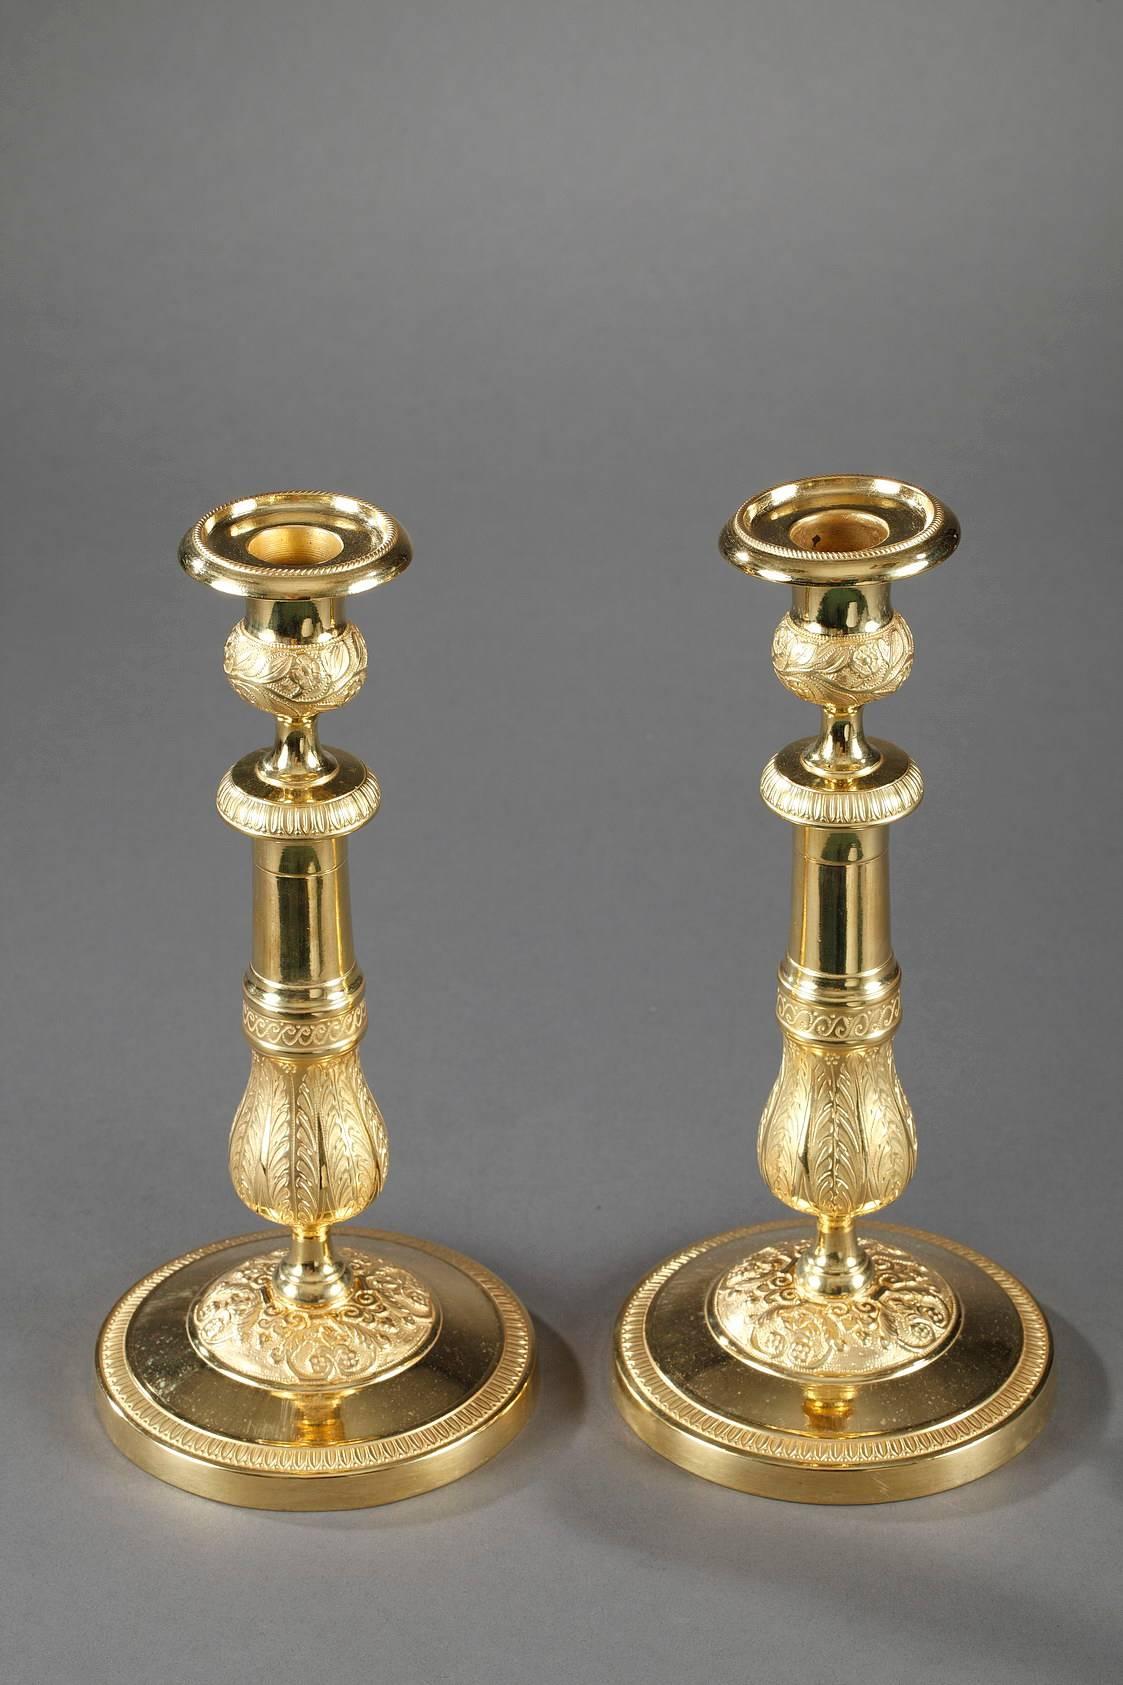 French Pair of Ormolu Candlesticks with Palmettes and Flowers